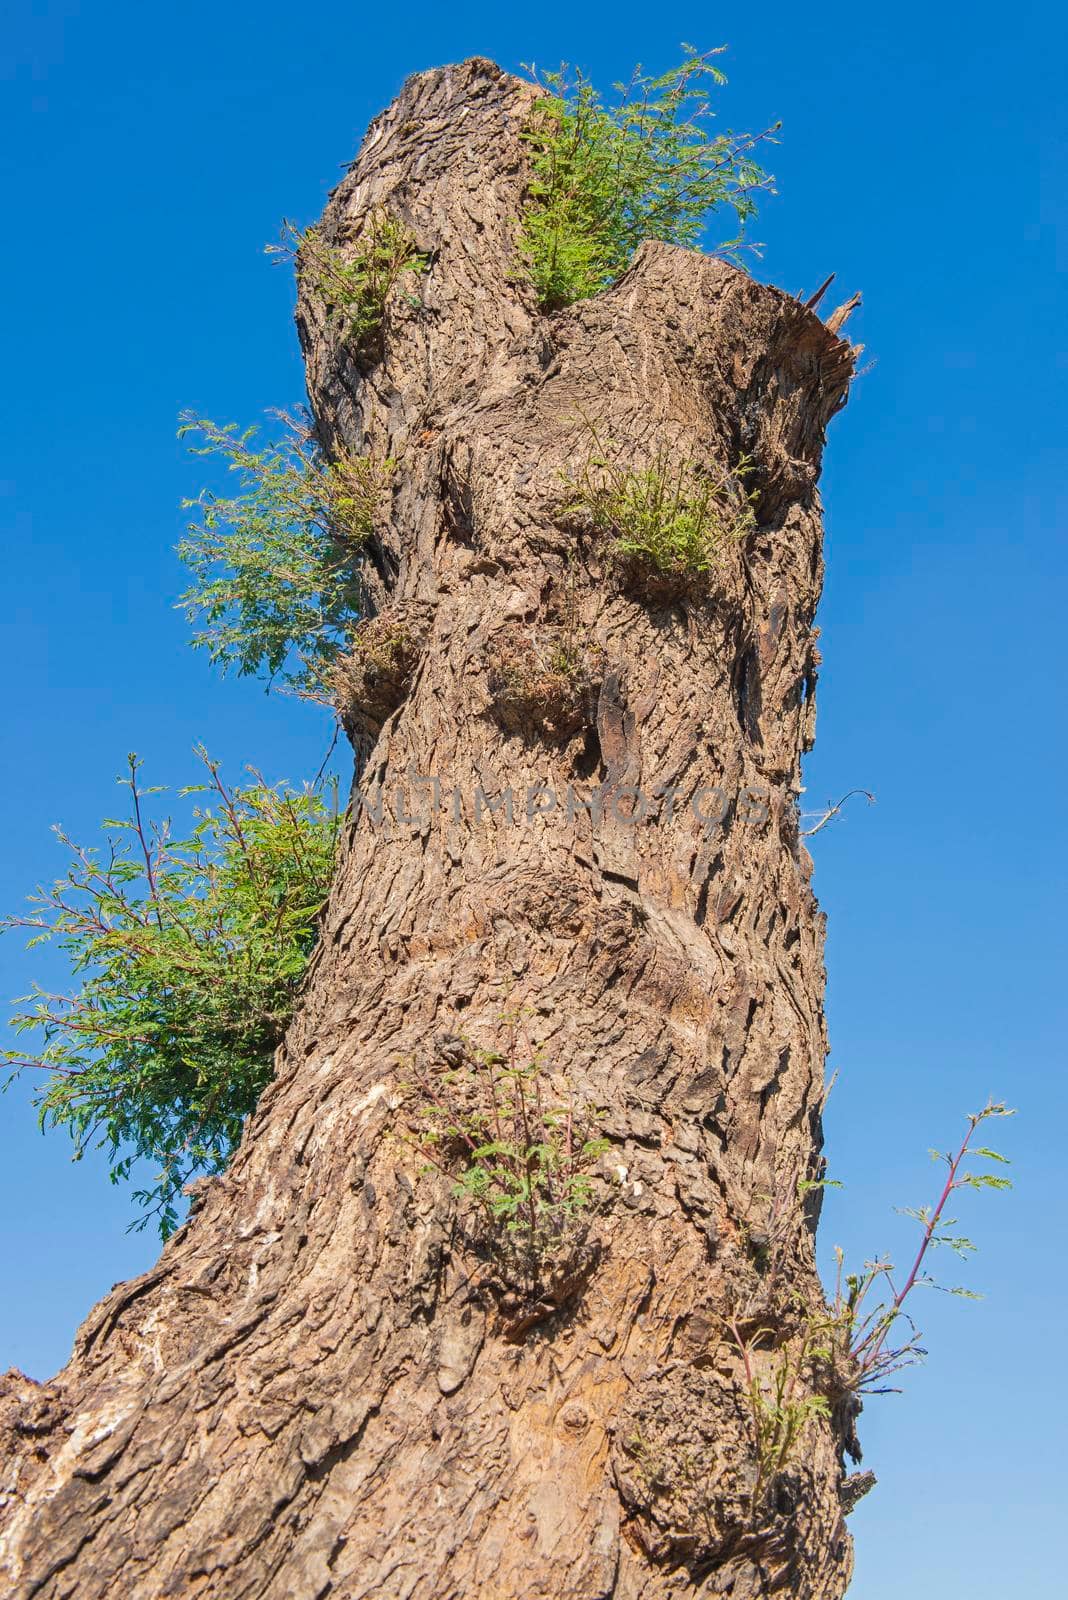 Closeup detail of large tree trunk with new growth against a blue sky background